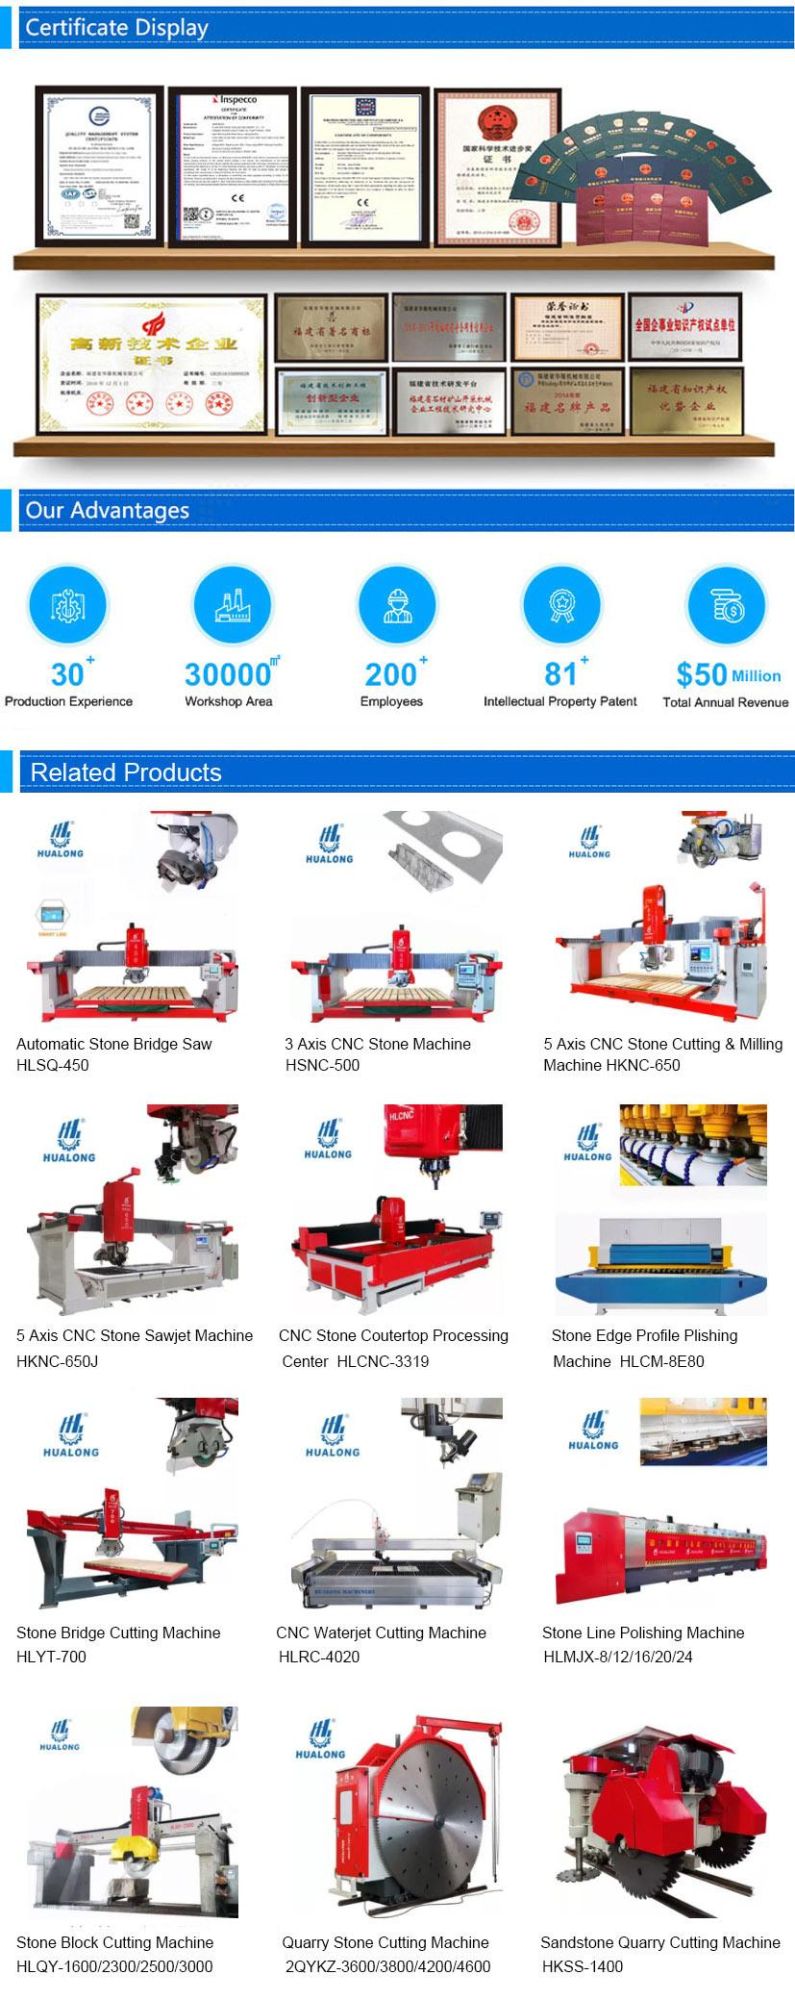 Hualong Stone Machinery 5 Axis CNC Granite Marble Cutter Processing Machine for Stone Kitchen Countertop Drilling Milling Engraving Profiling with Diamond Disc